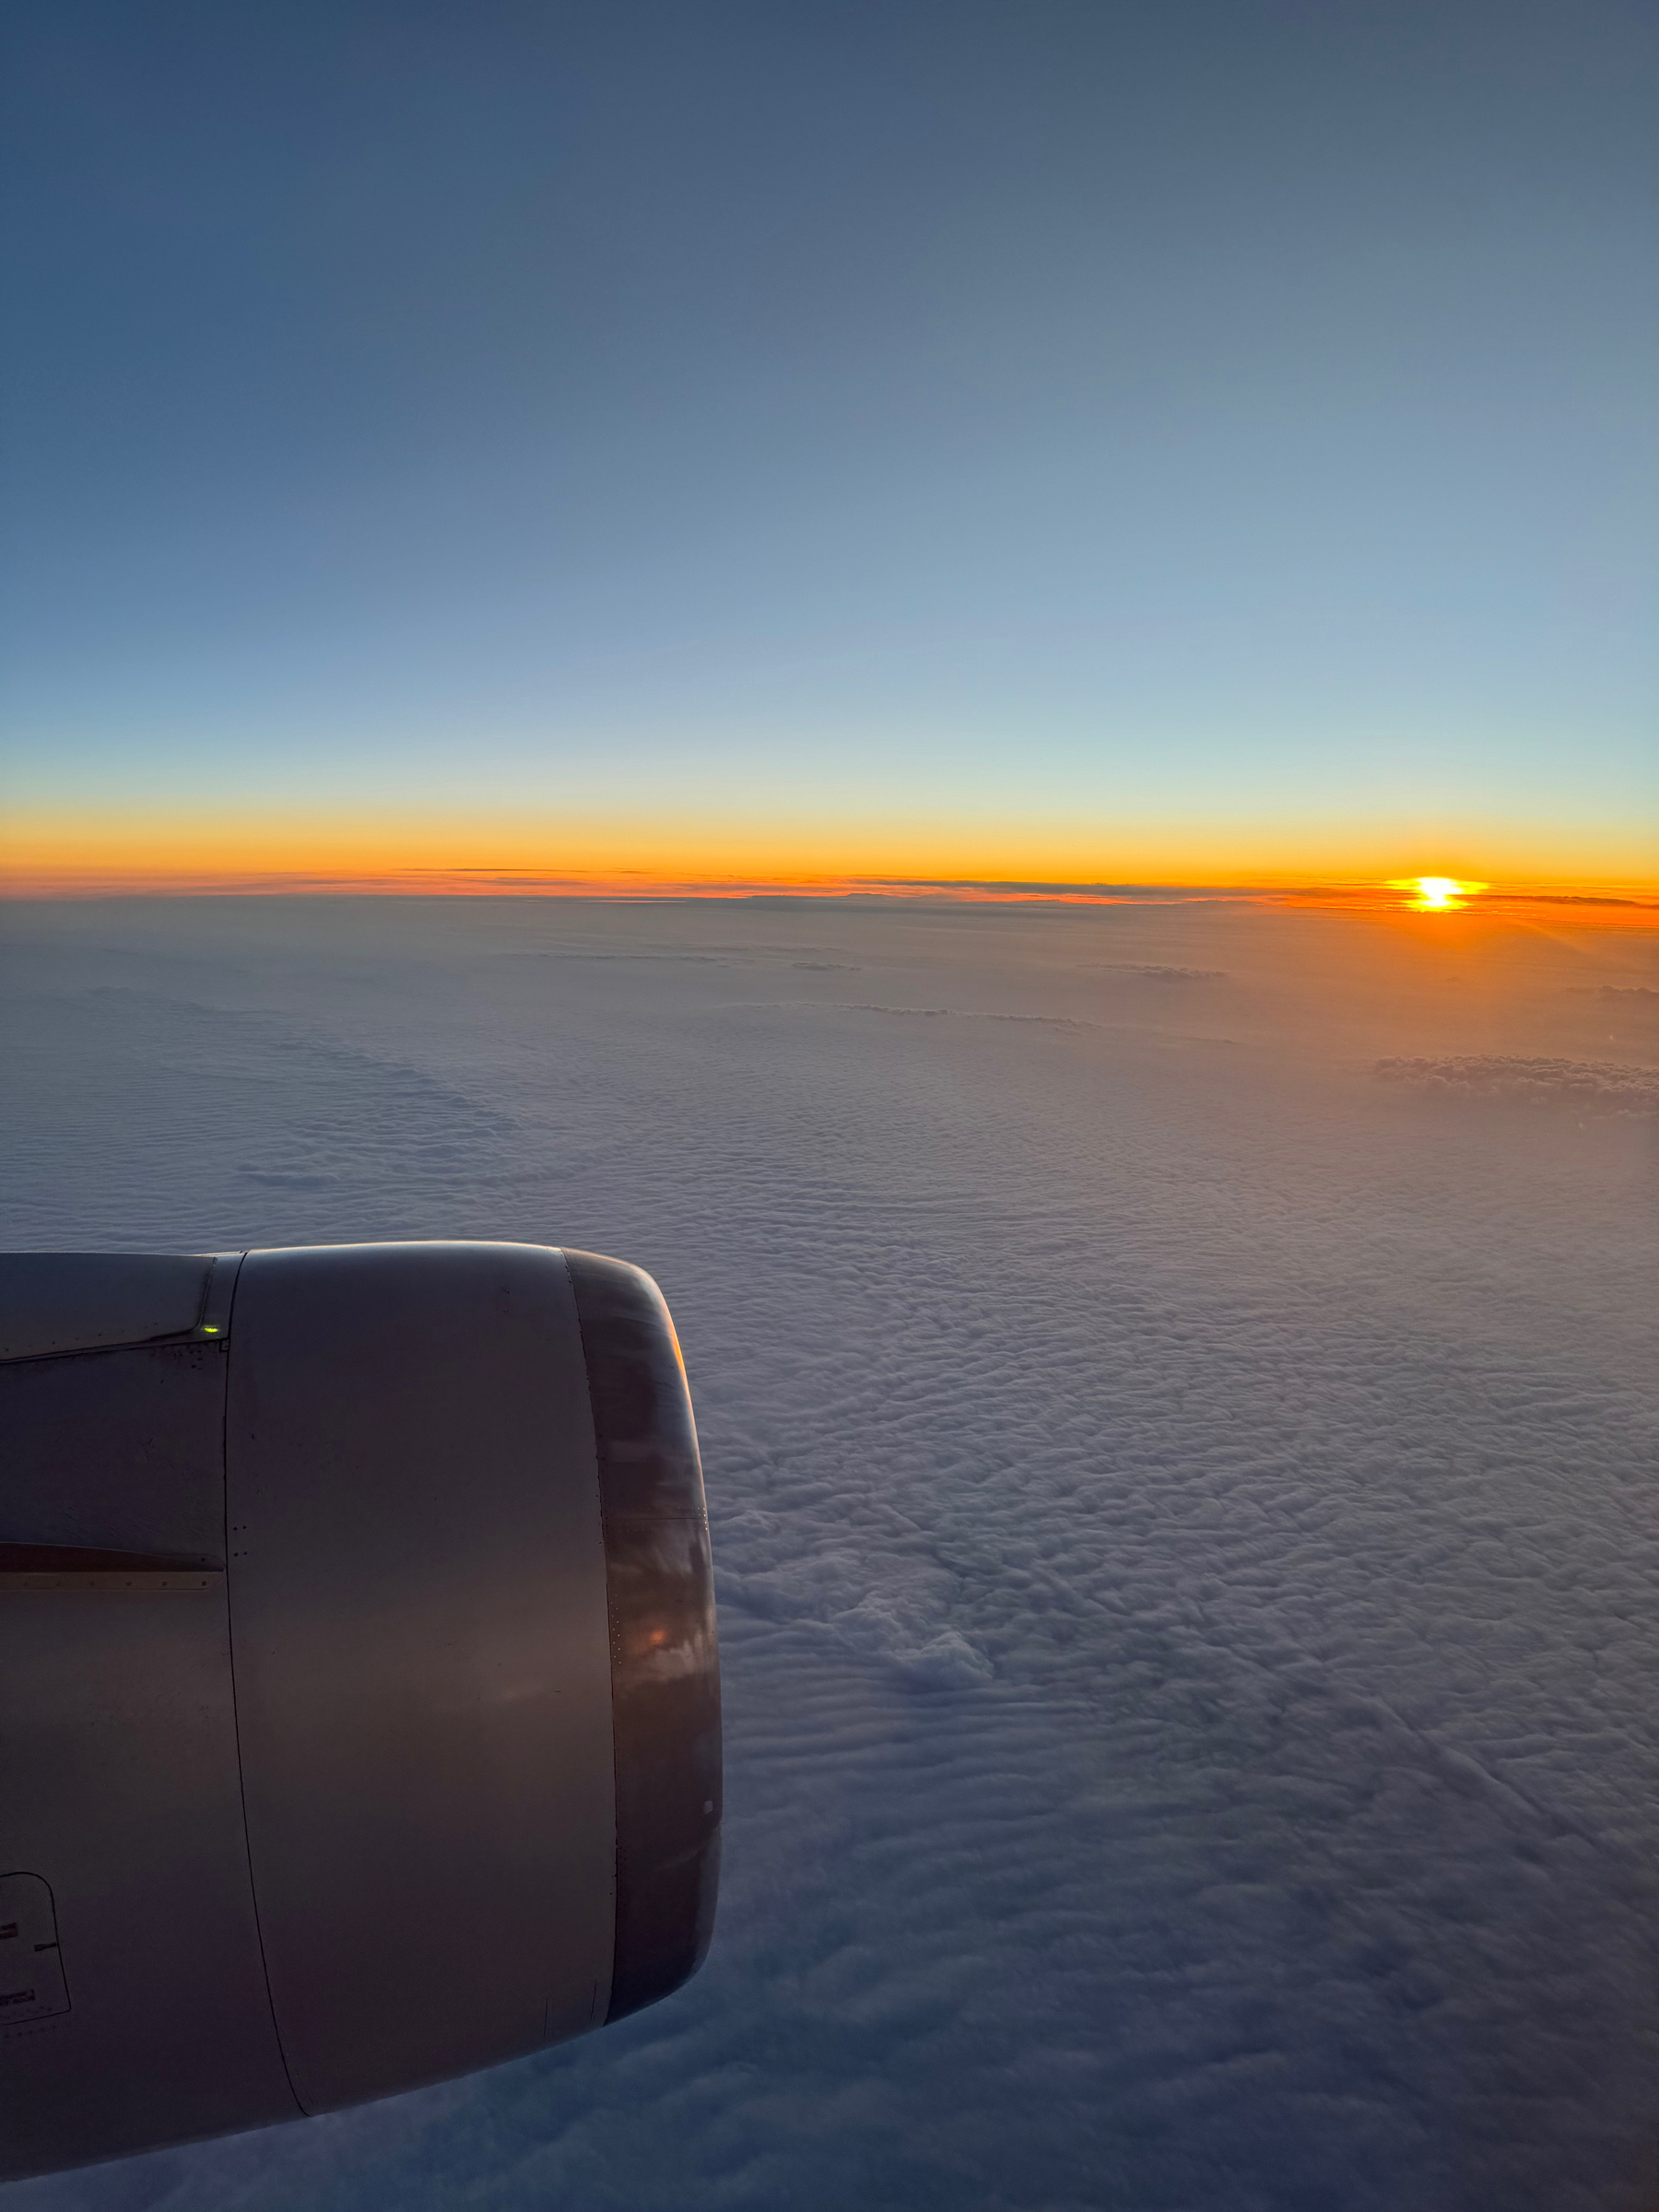 Airplane wing and engine against a backdrop of a sunrise sky with clouds below.